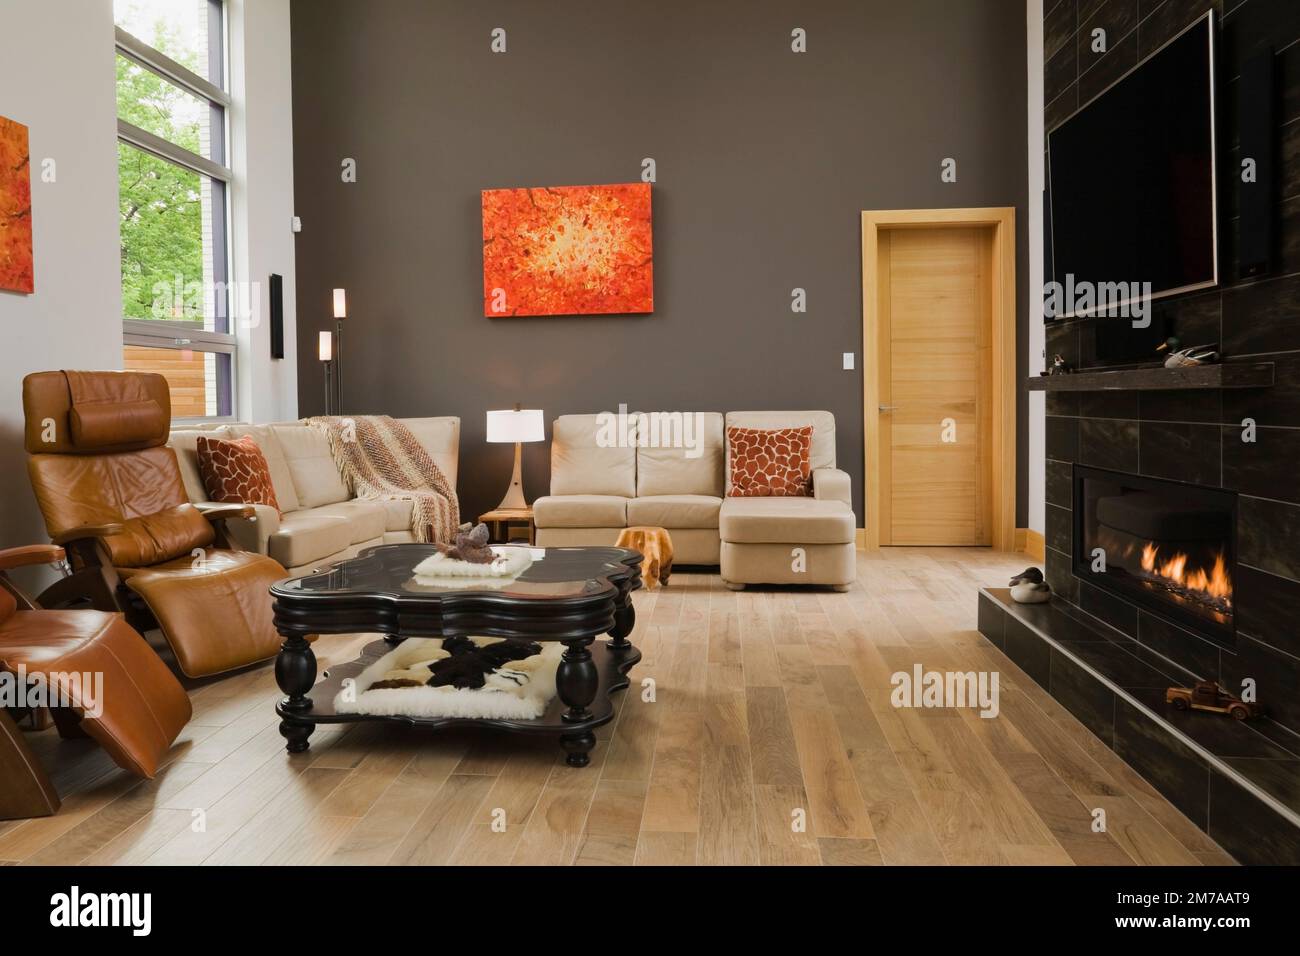 Caramel leather high back reclining armchairs and tan sofas with black wooden glass top coffee table and lit propane gas fireplace in living room. Stock Photo